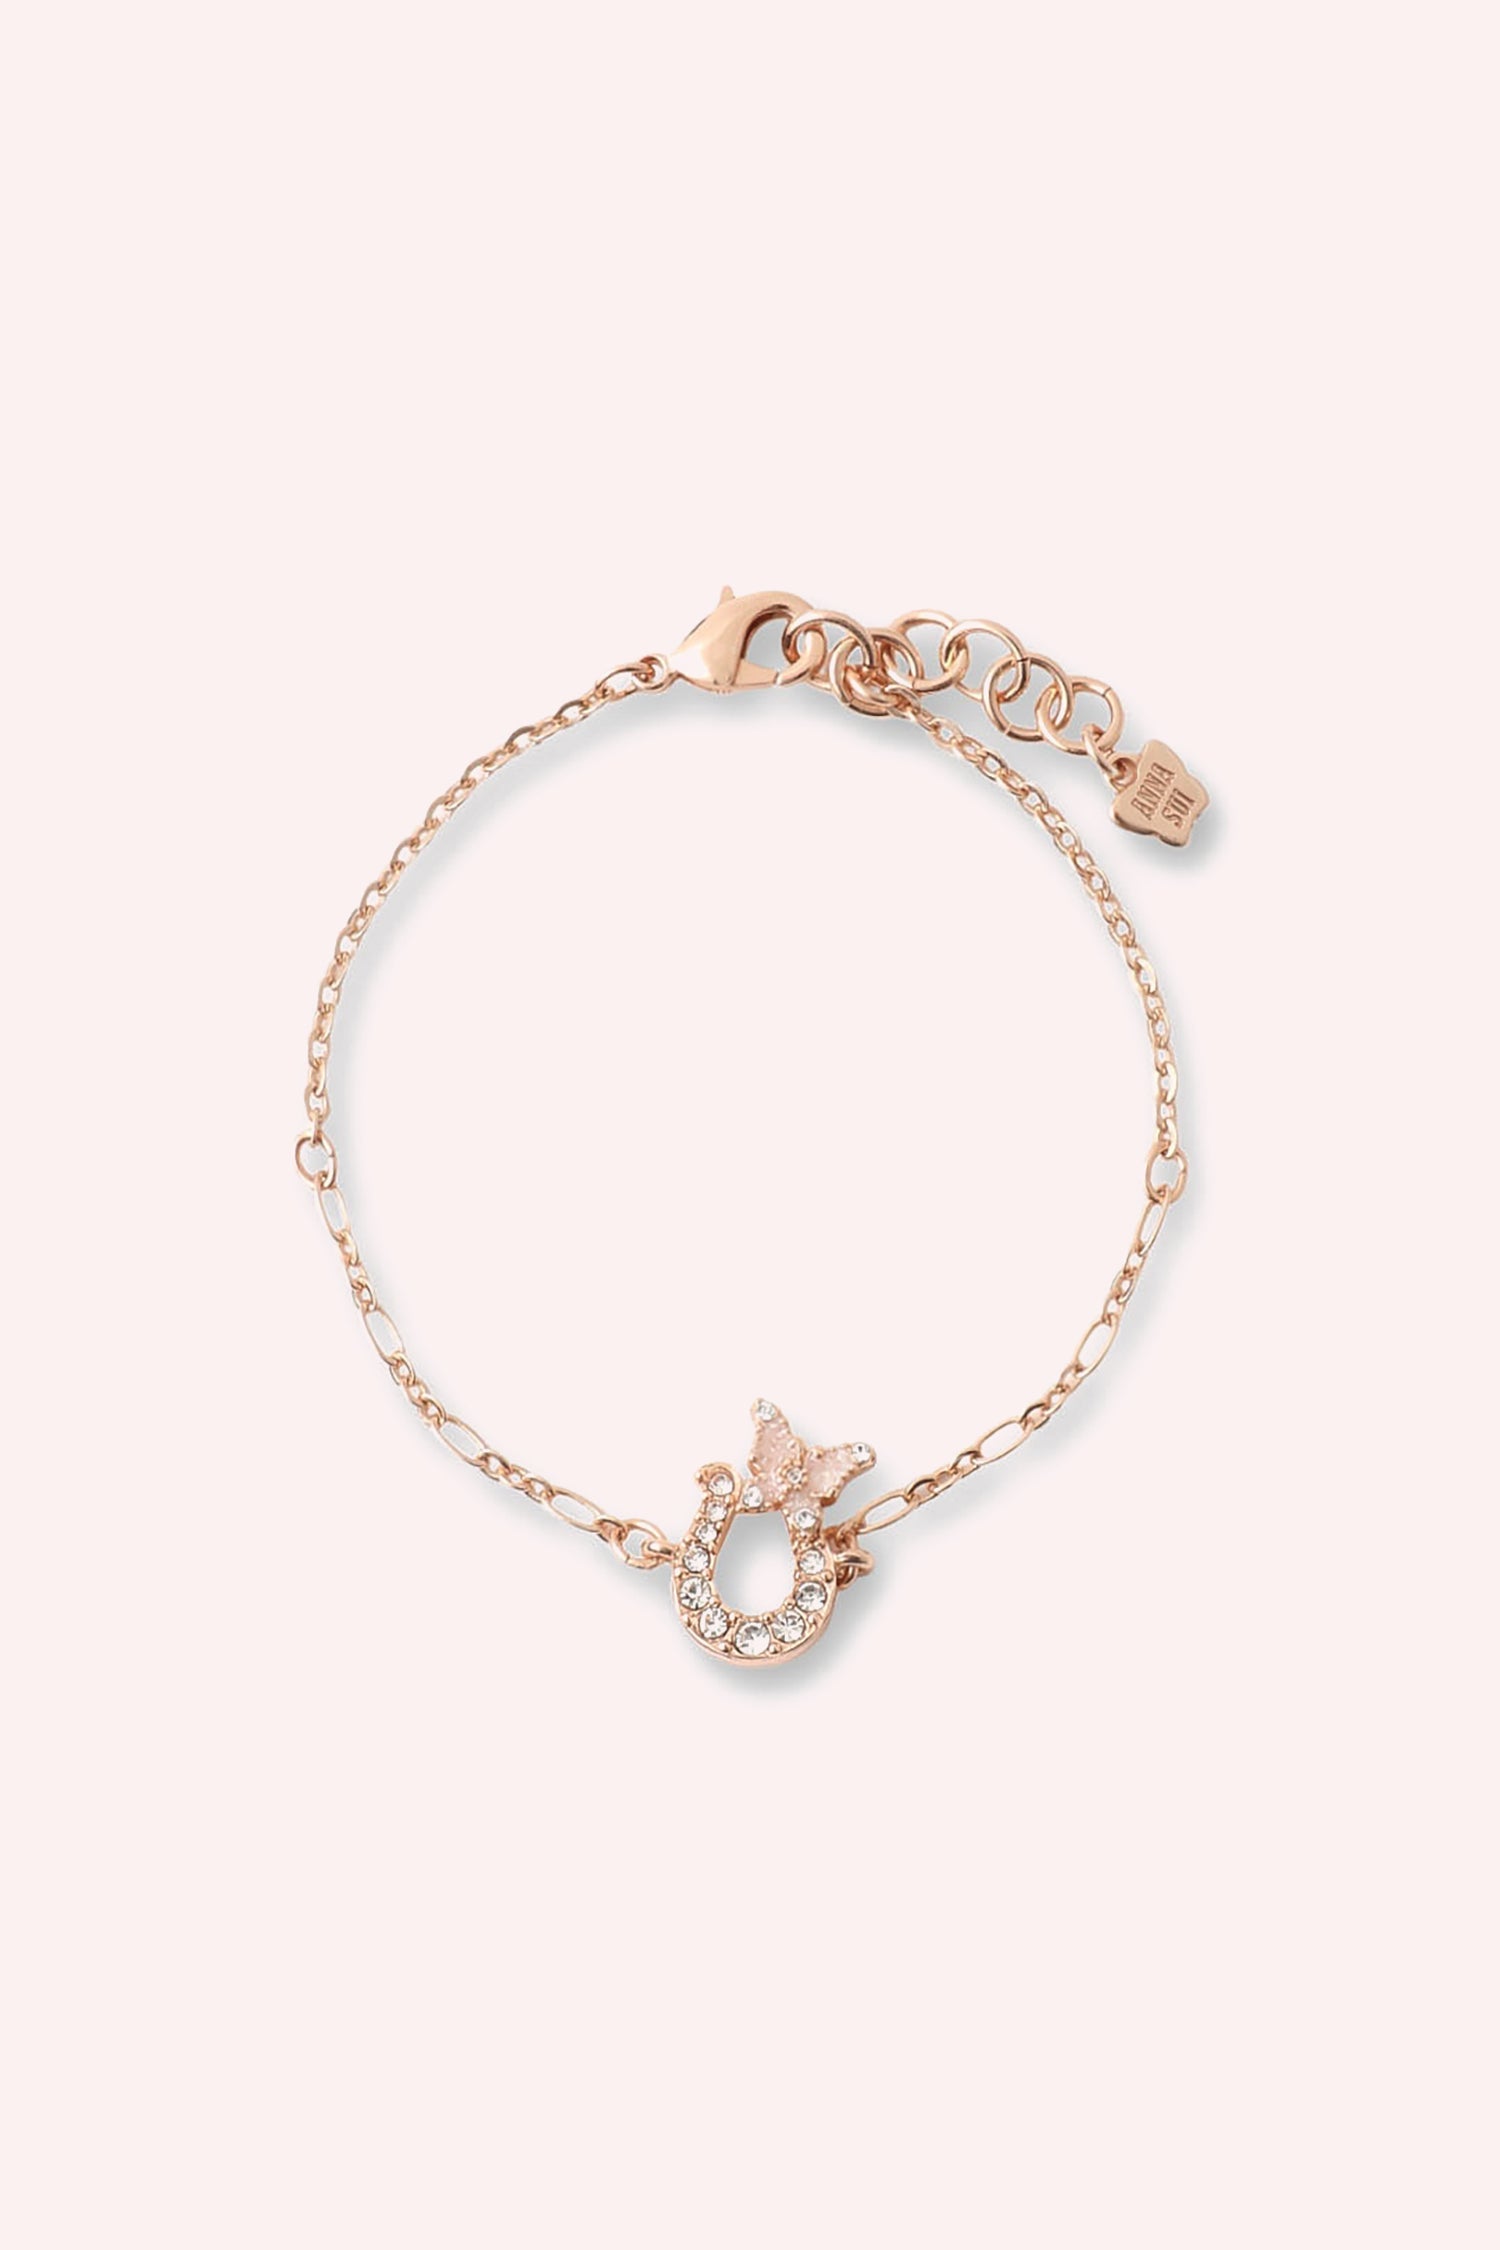 Rose Gold Bracelet with a horseshoe a butterfly on top, Adorned with Gems